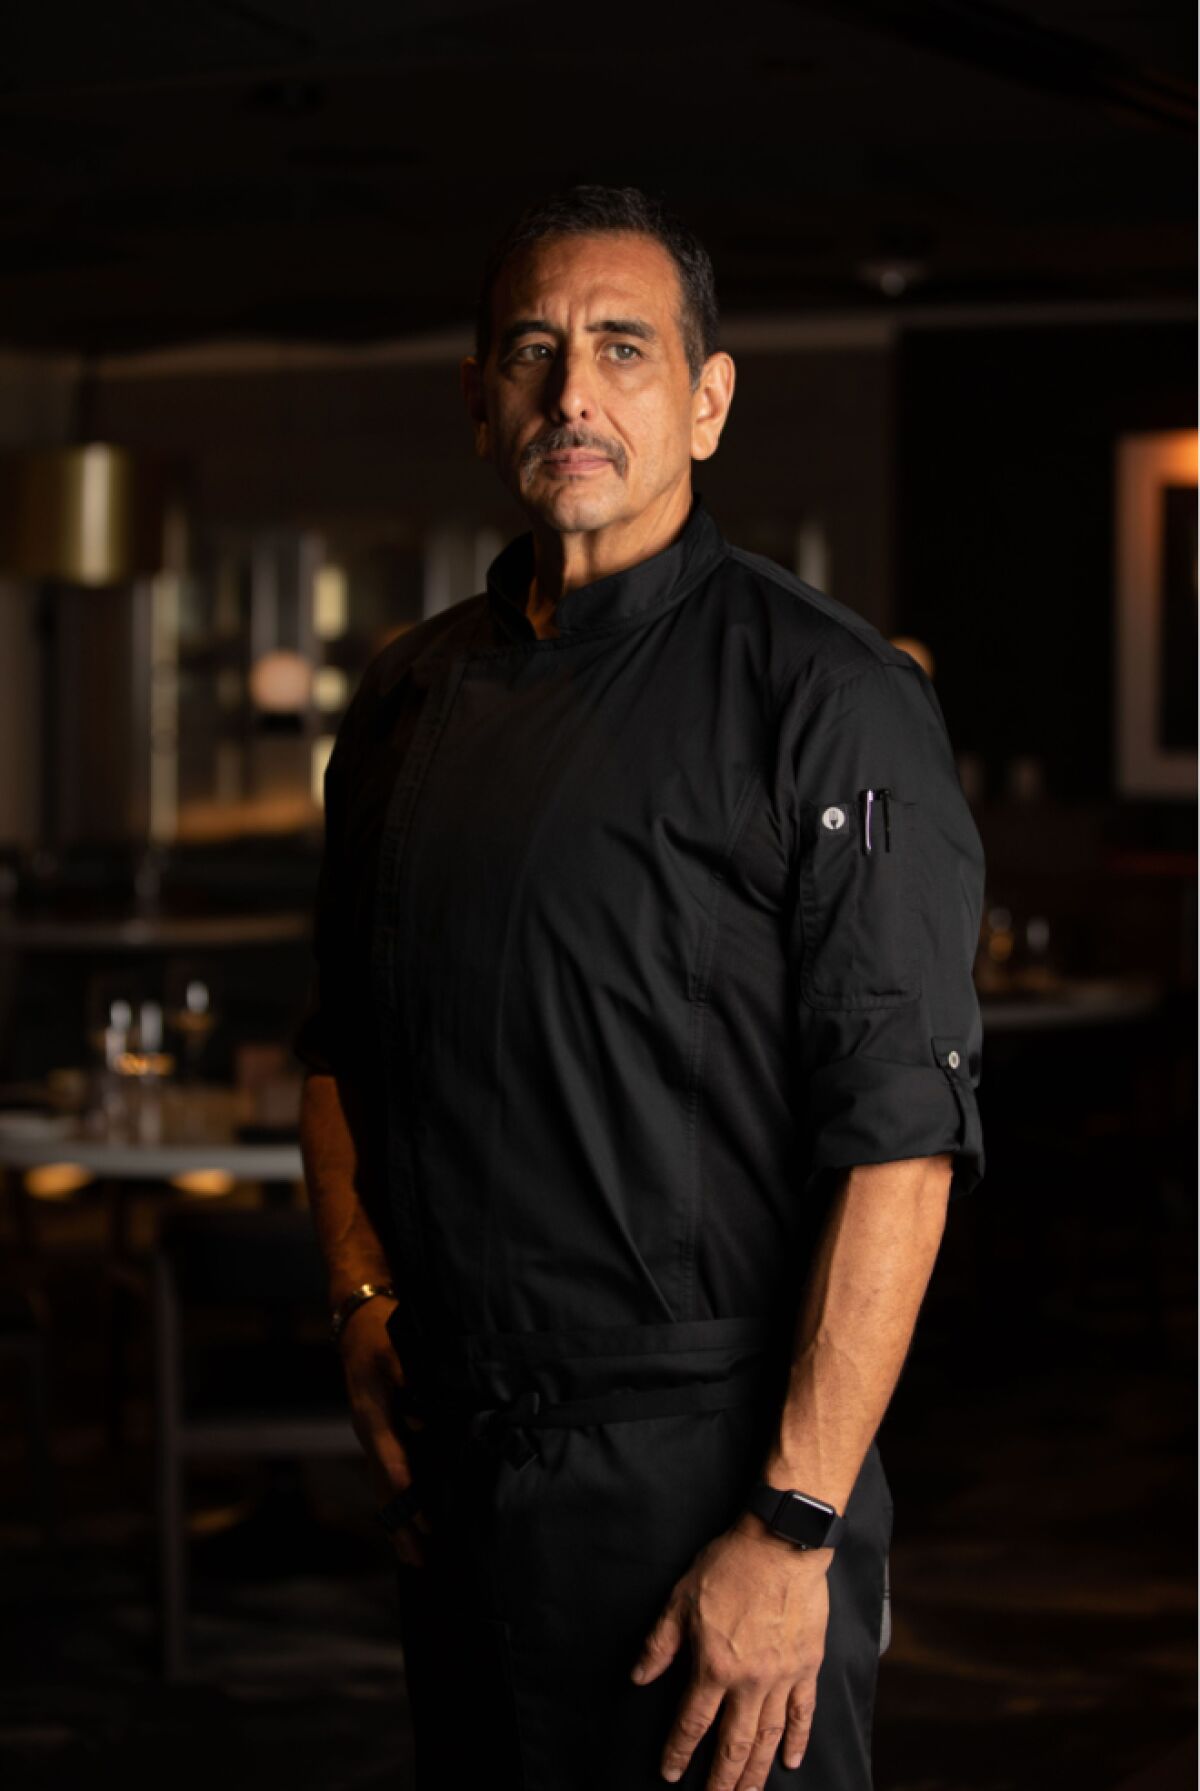 James Montejano is the new executive chef at International Smoke Del Mar restaurant.